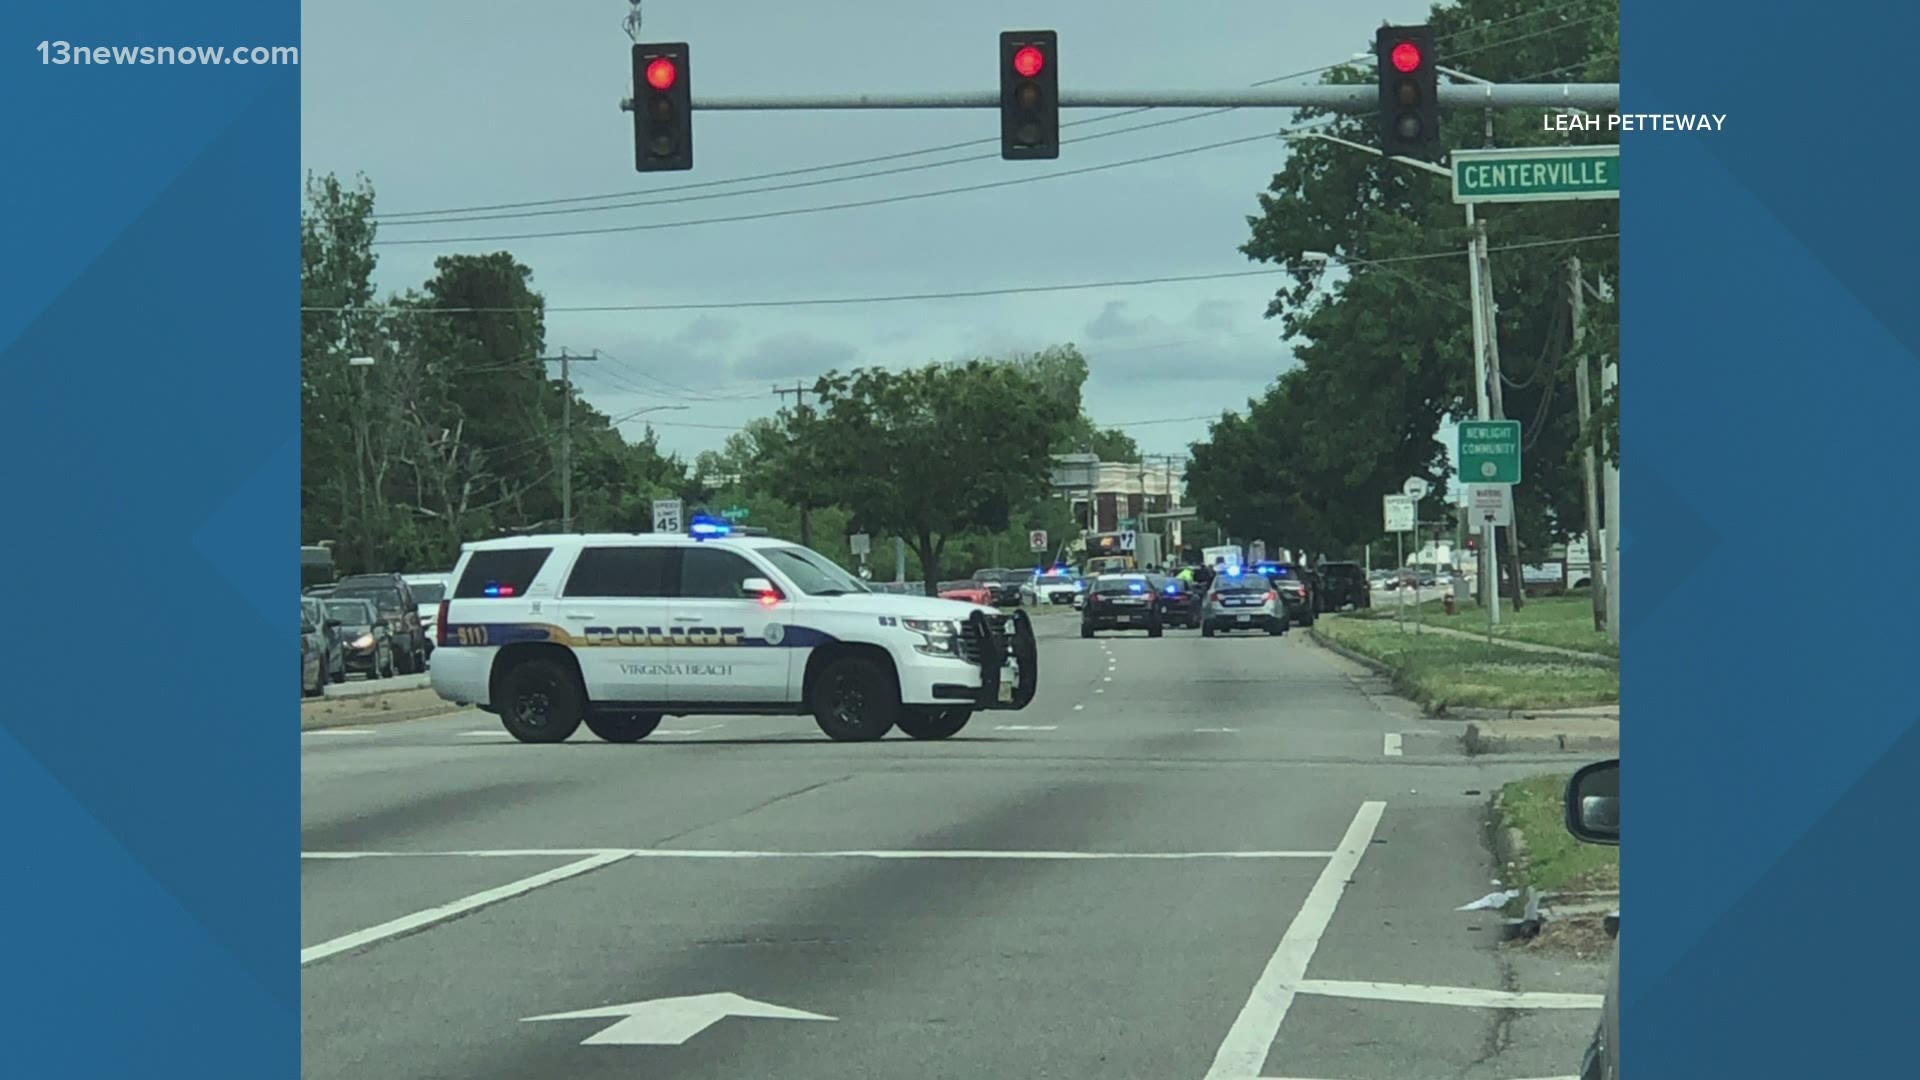 Police say four juveniles in a stolen car led them on a chase across Chesapeake, Portsmouth, and into Virginia Beach.